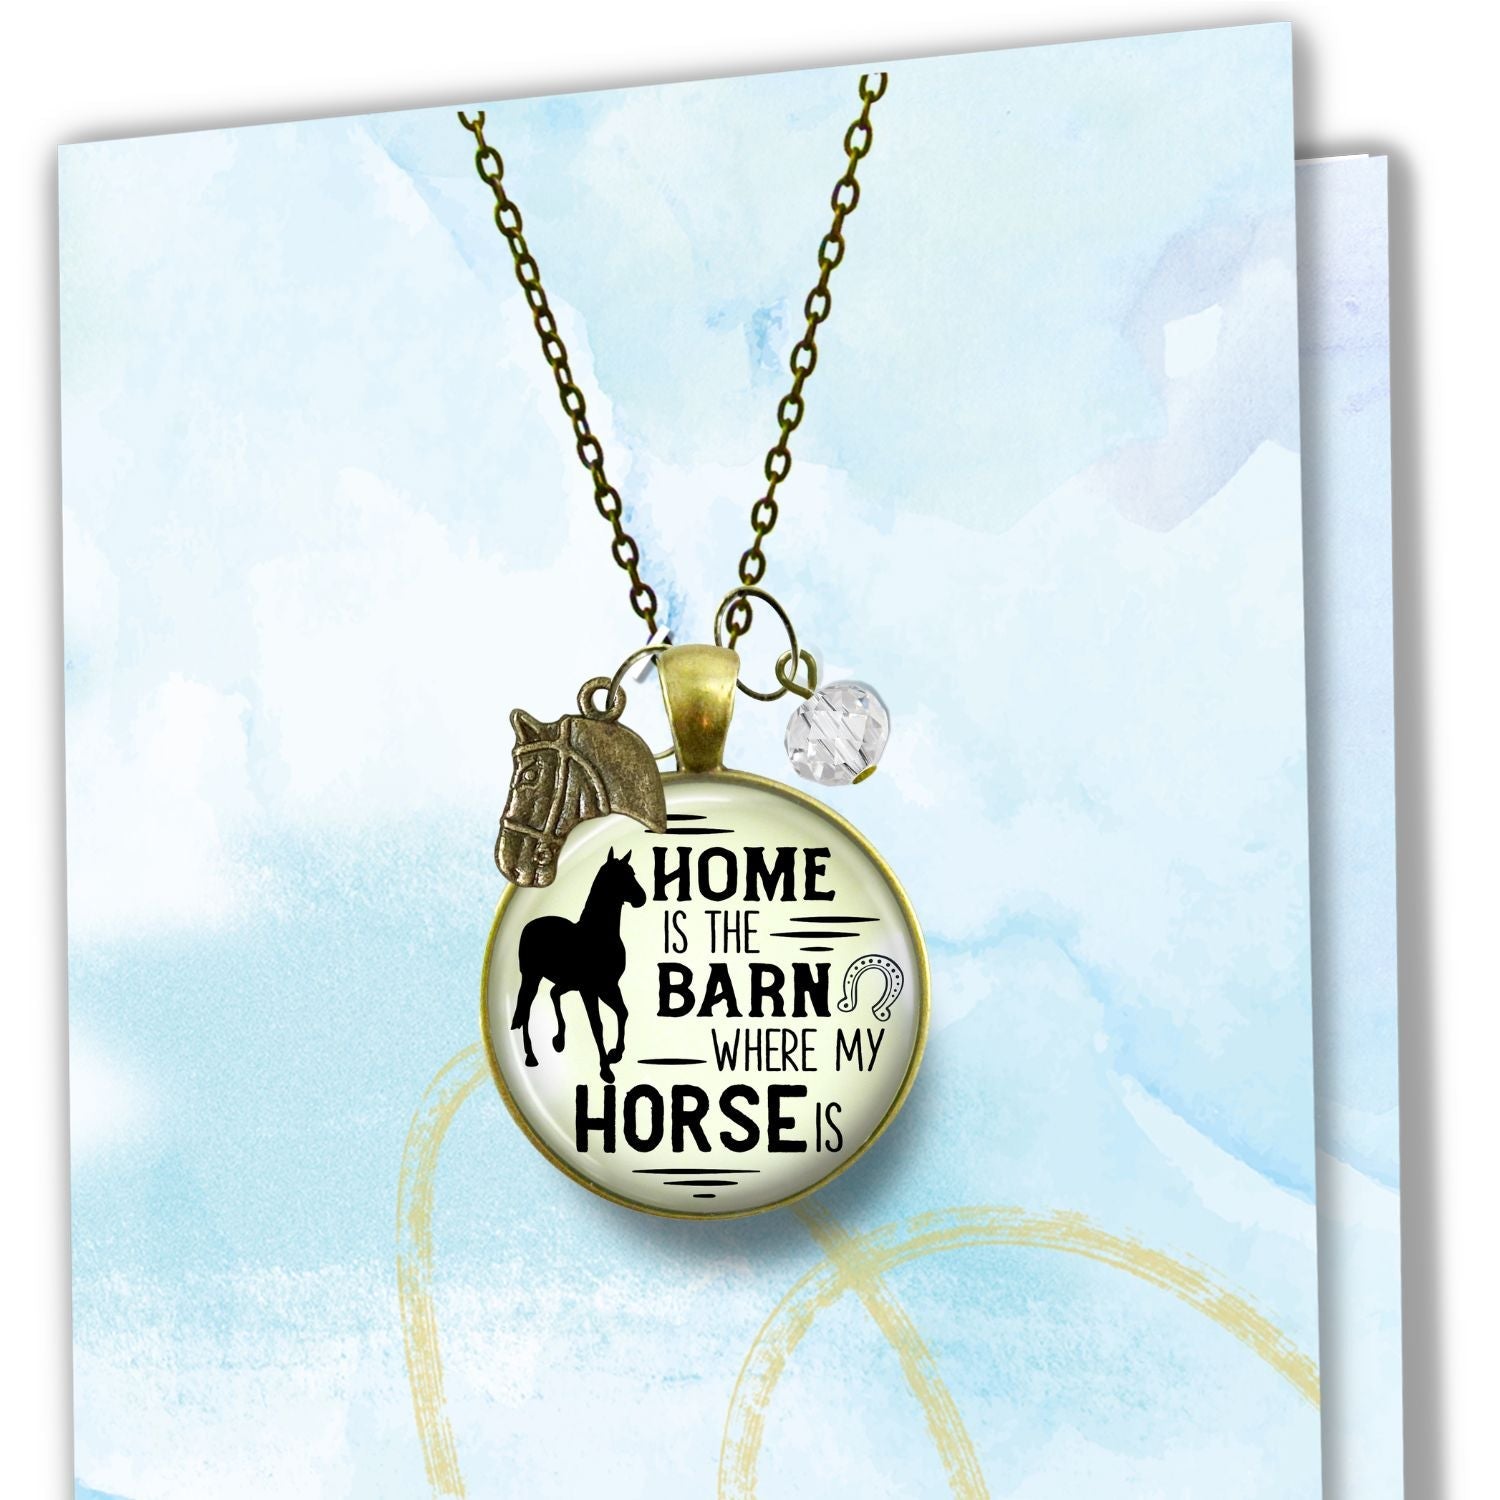 Handmade Gutsy Goodness Jewelry Home Is The Barn Where My Horse Is Necklace Western Boho Country Girl Charm Jewelry & Card